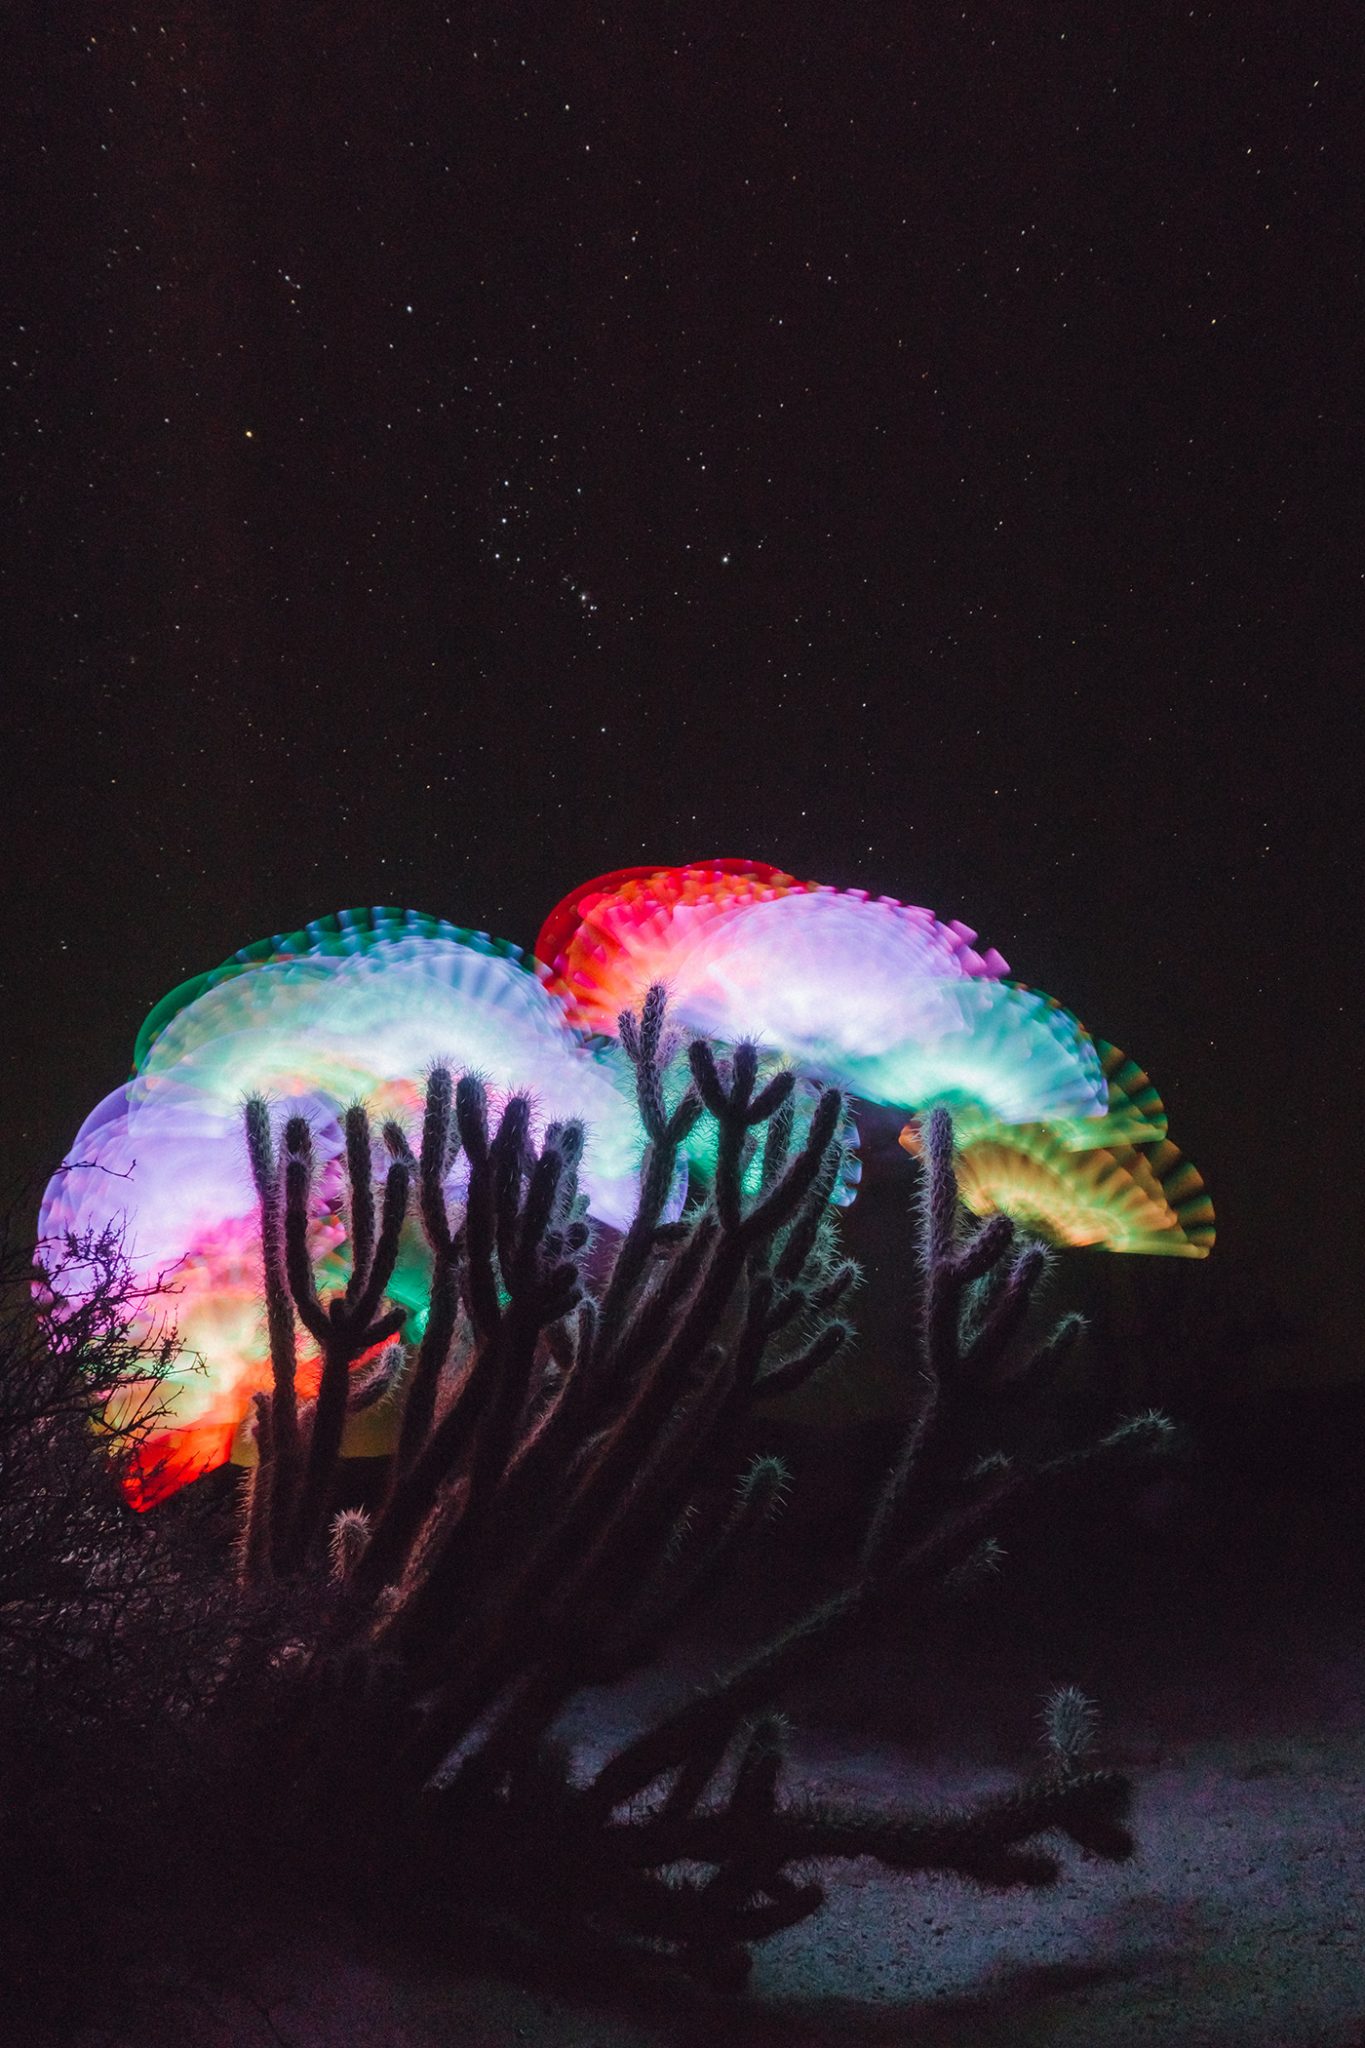 Long Exposure Of Cactus And Glowsticks With The Starry Night Sky